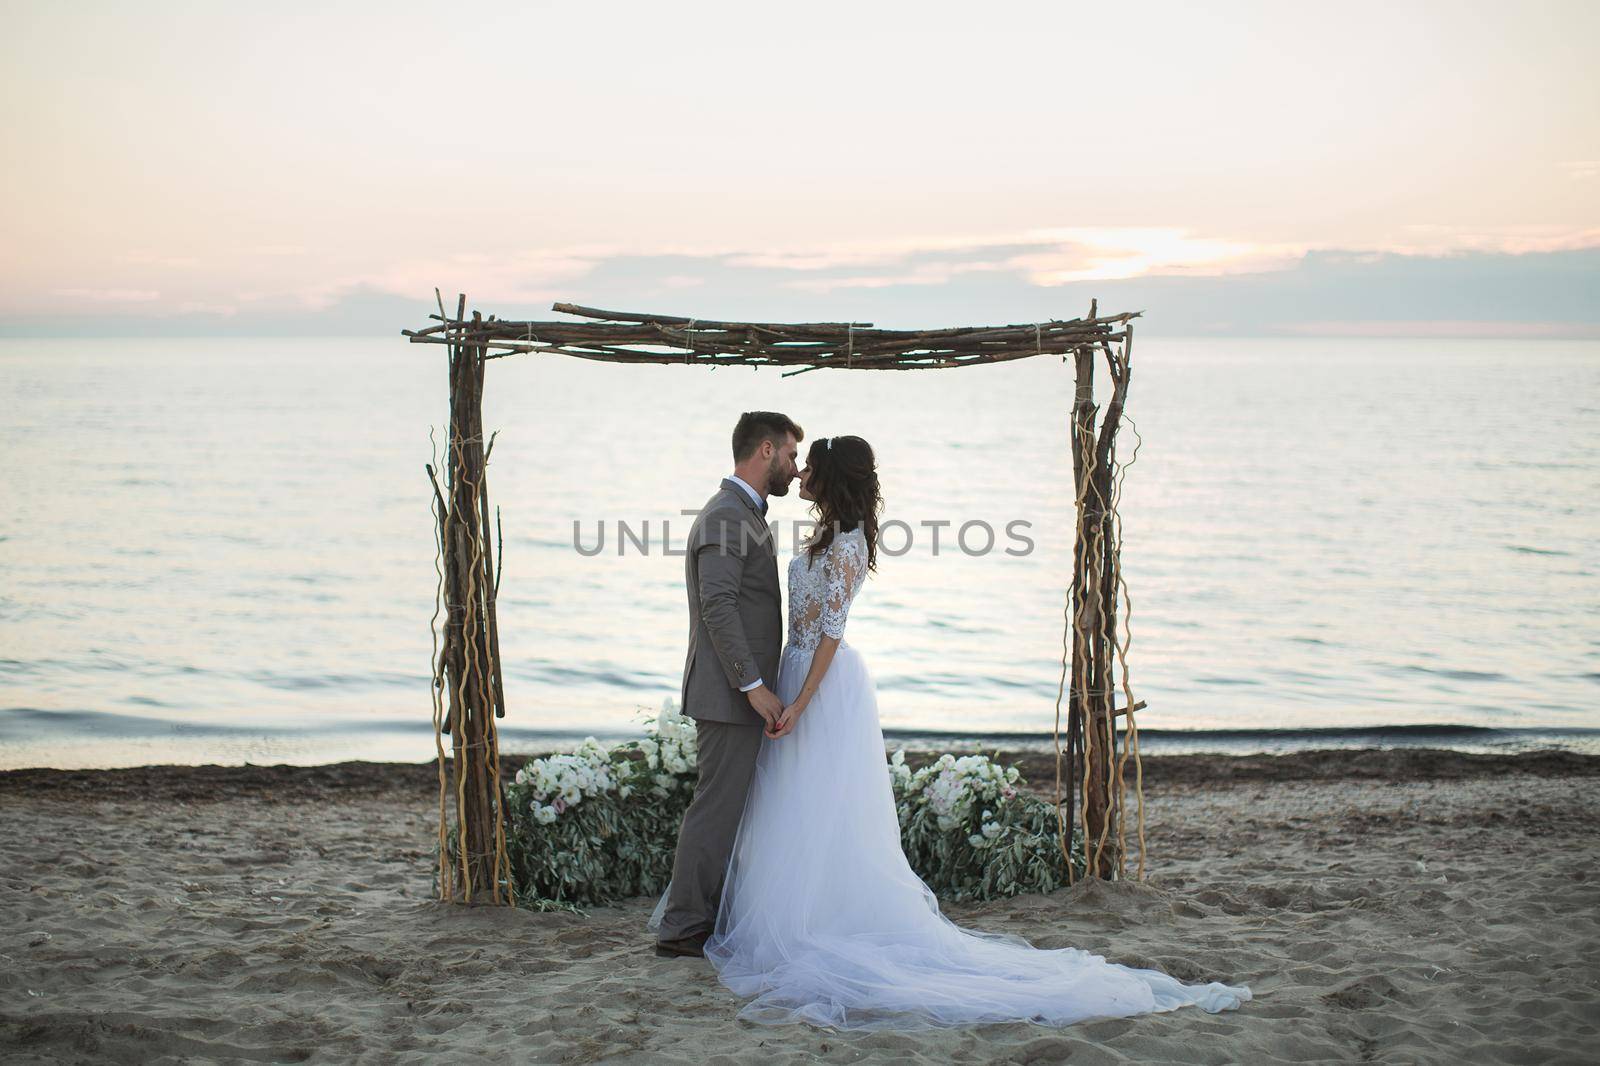 The bride and groom under archway on beach. Sunset, twilight by StudioPeace